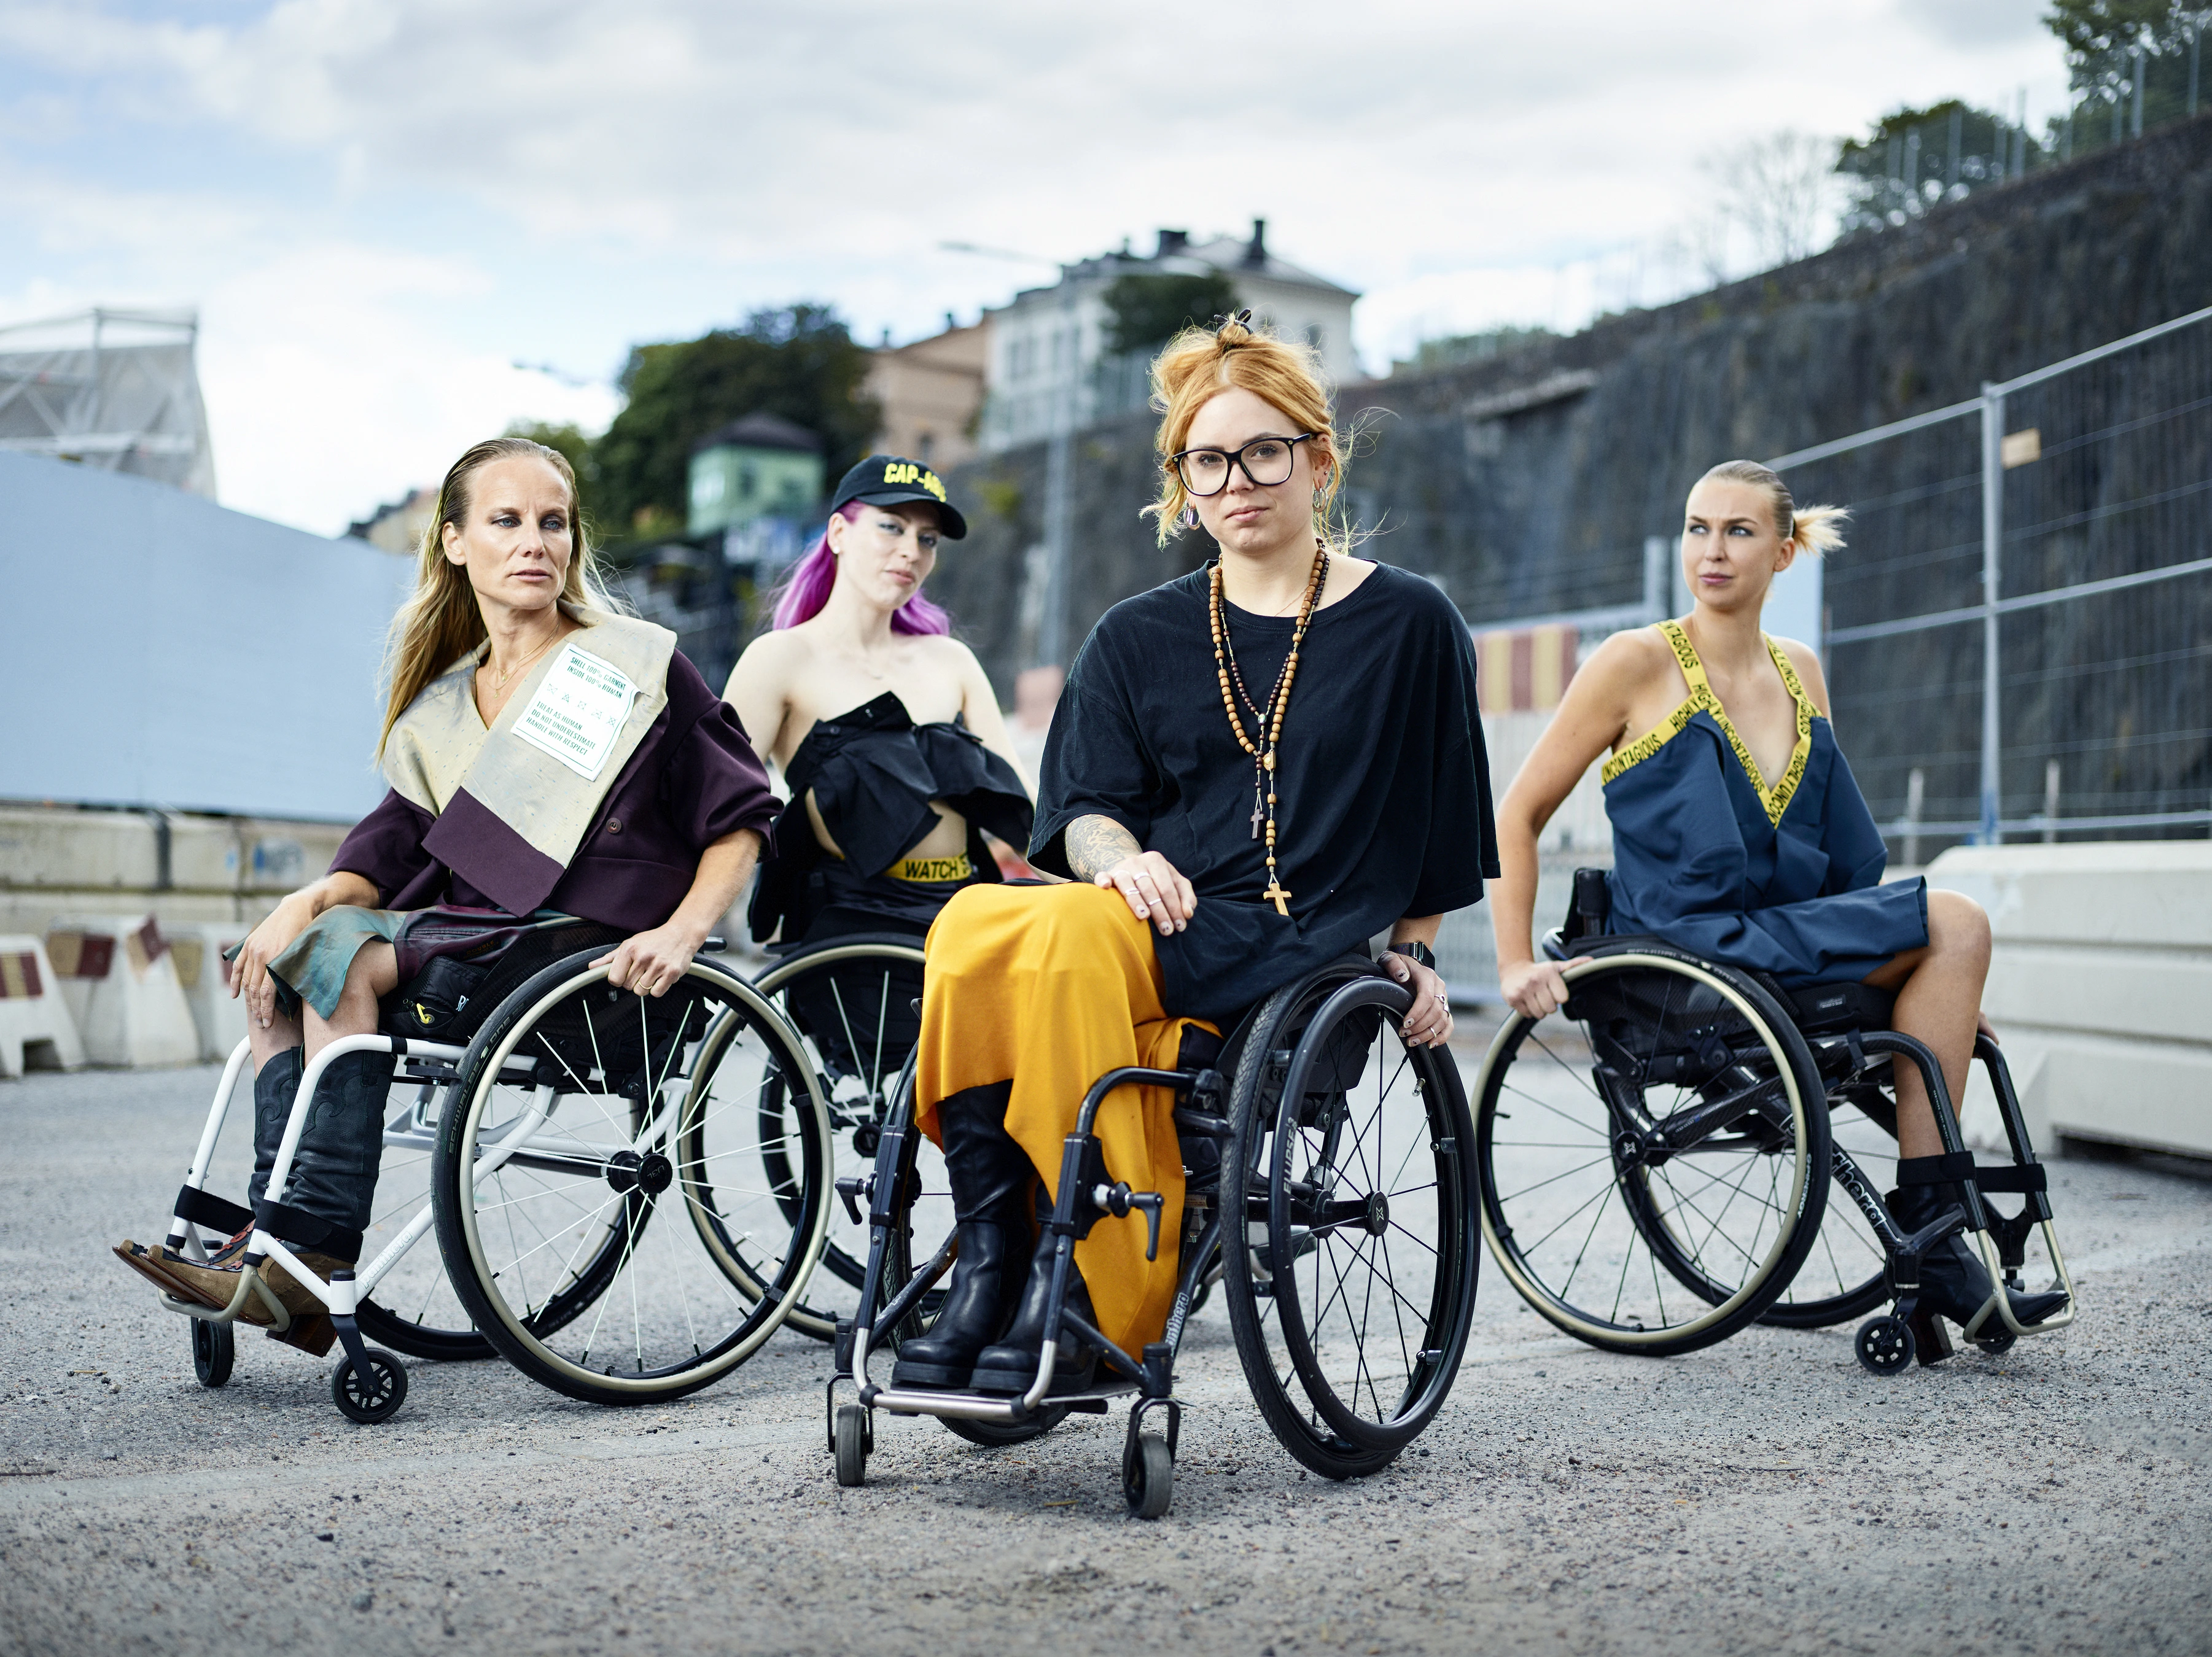 Stockholm Fashion Week 2022: Who Chairs? group photo